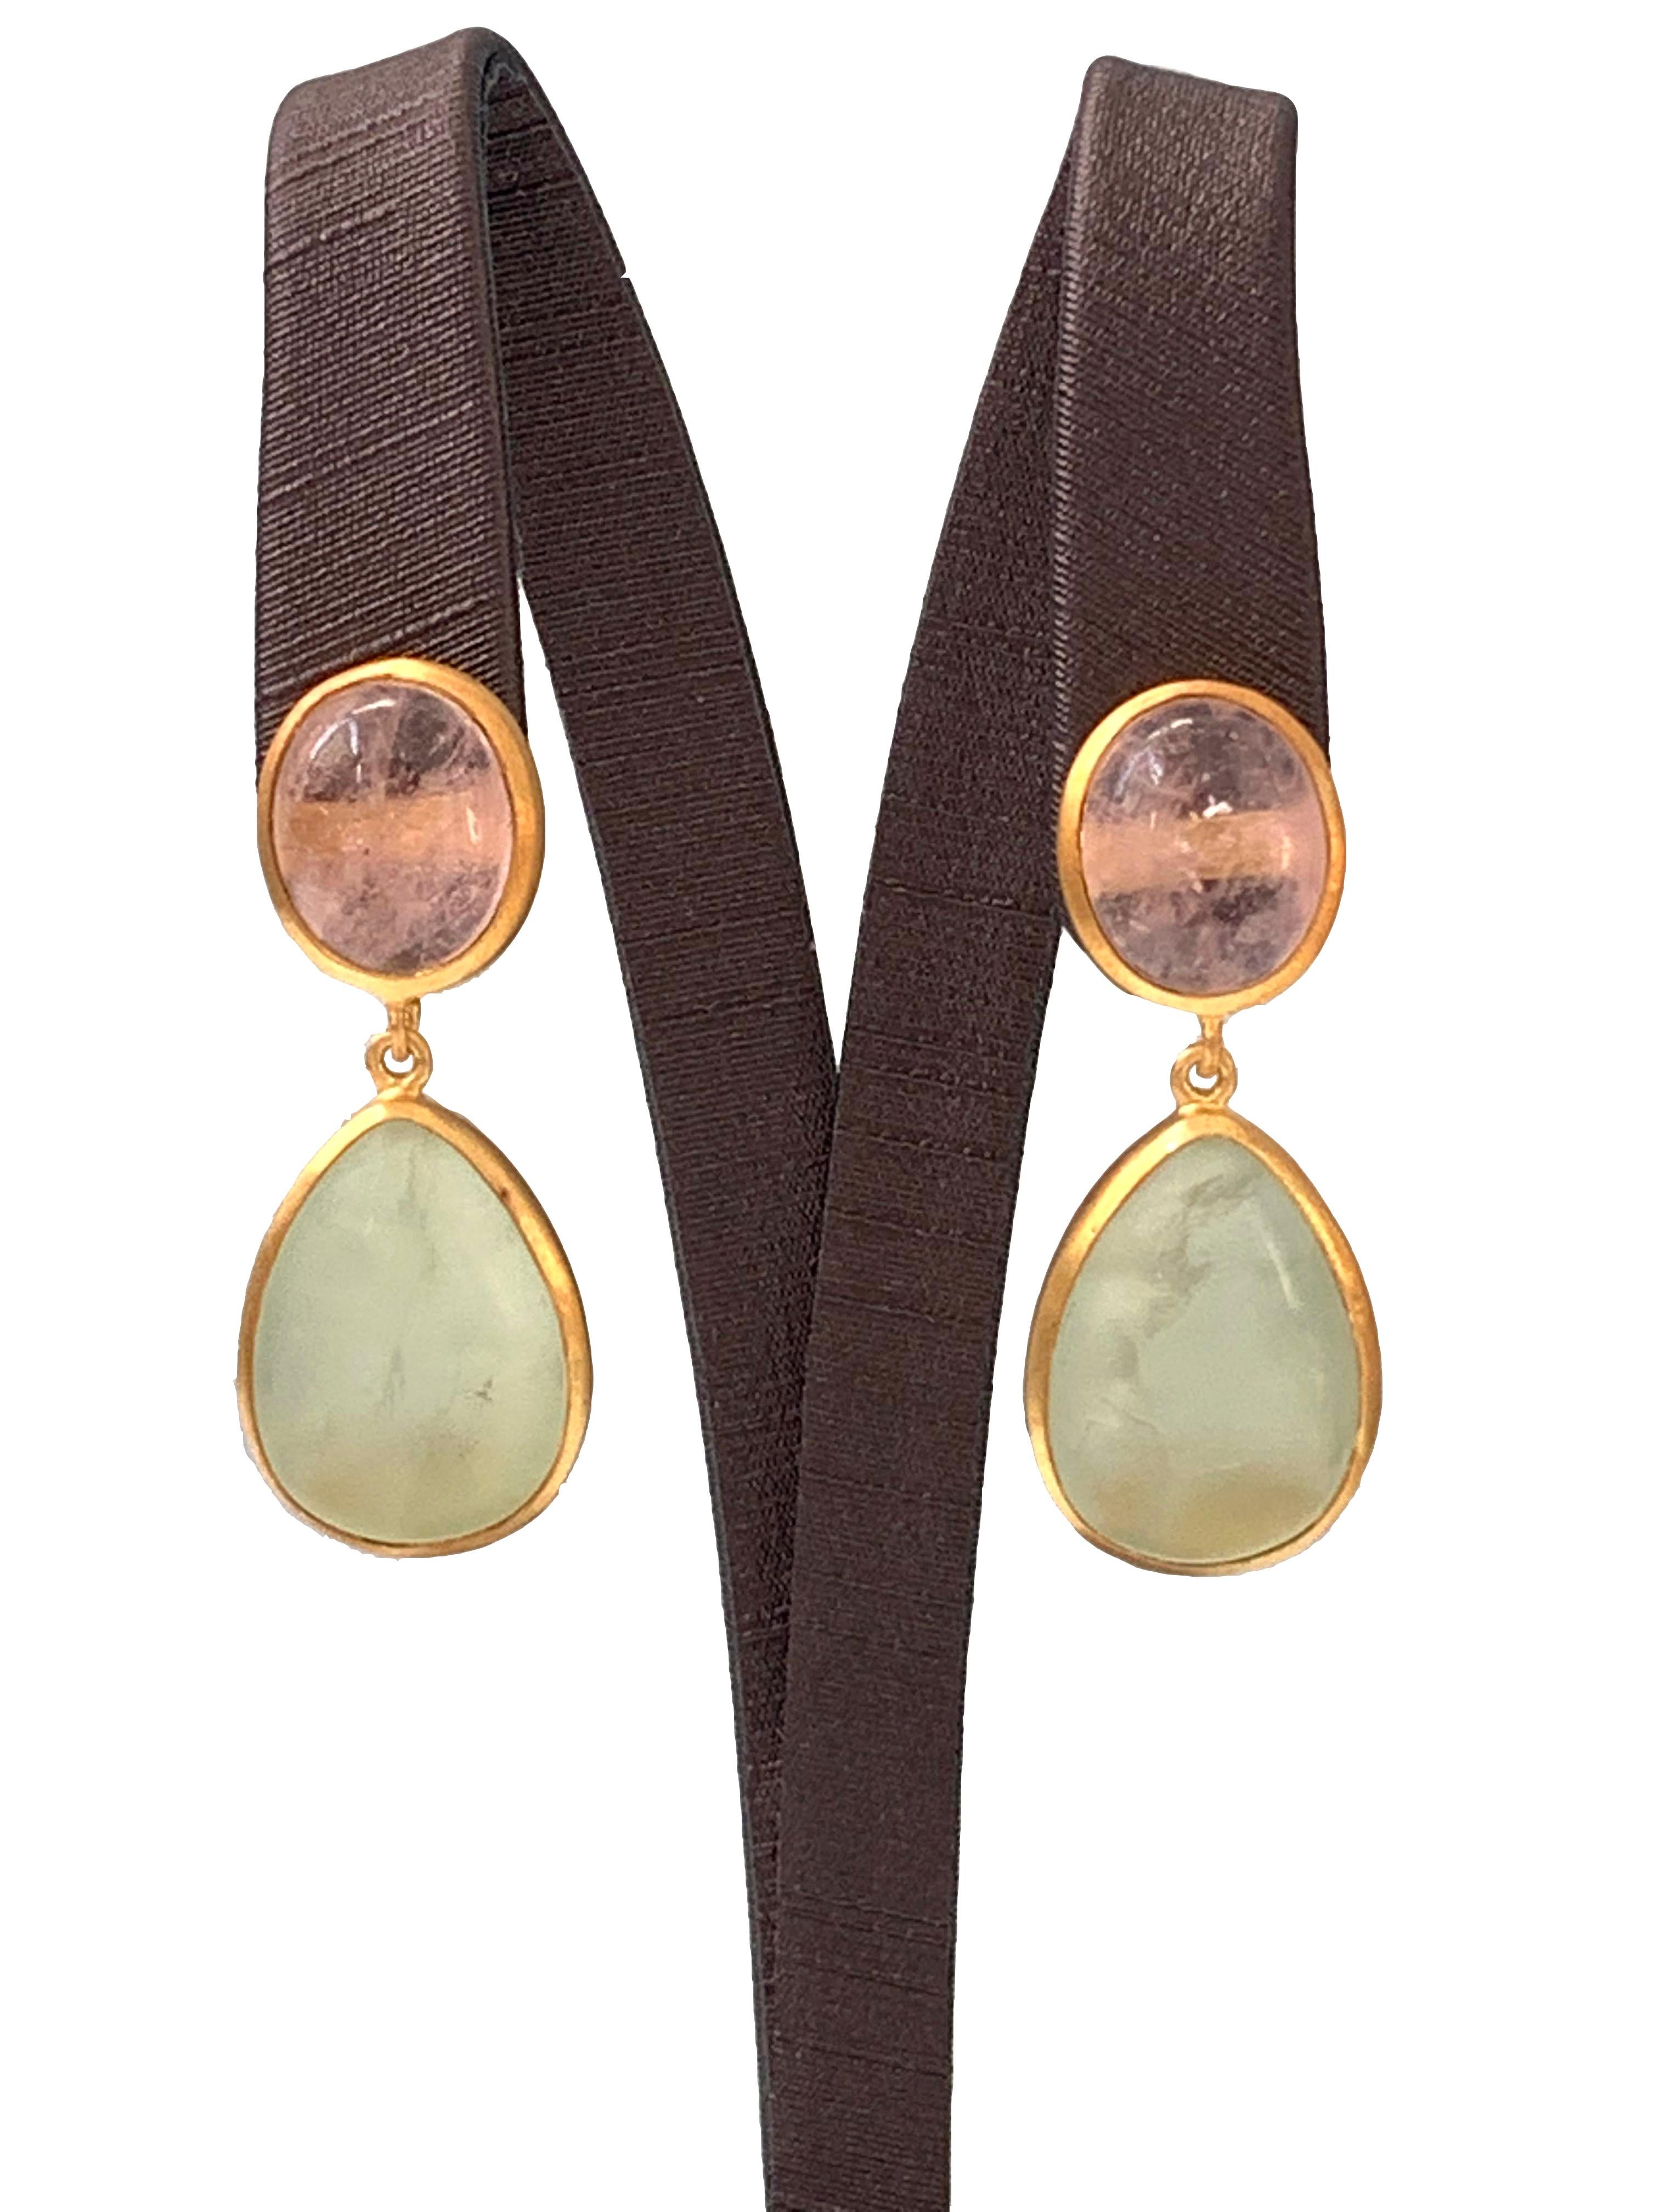 Discover these oval Morganite and pear-shape Prehnite Drop Earrings.  

The earrings feature glowing pastel pink cabochon-cut oval Morganite and vitreous green cabochon-cut pear shape Prehnite, handcrafted brushed satin texturing technique, and hand